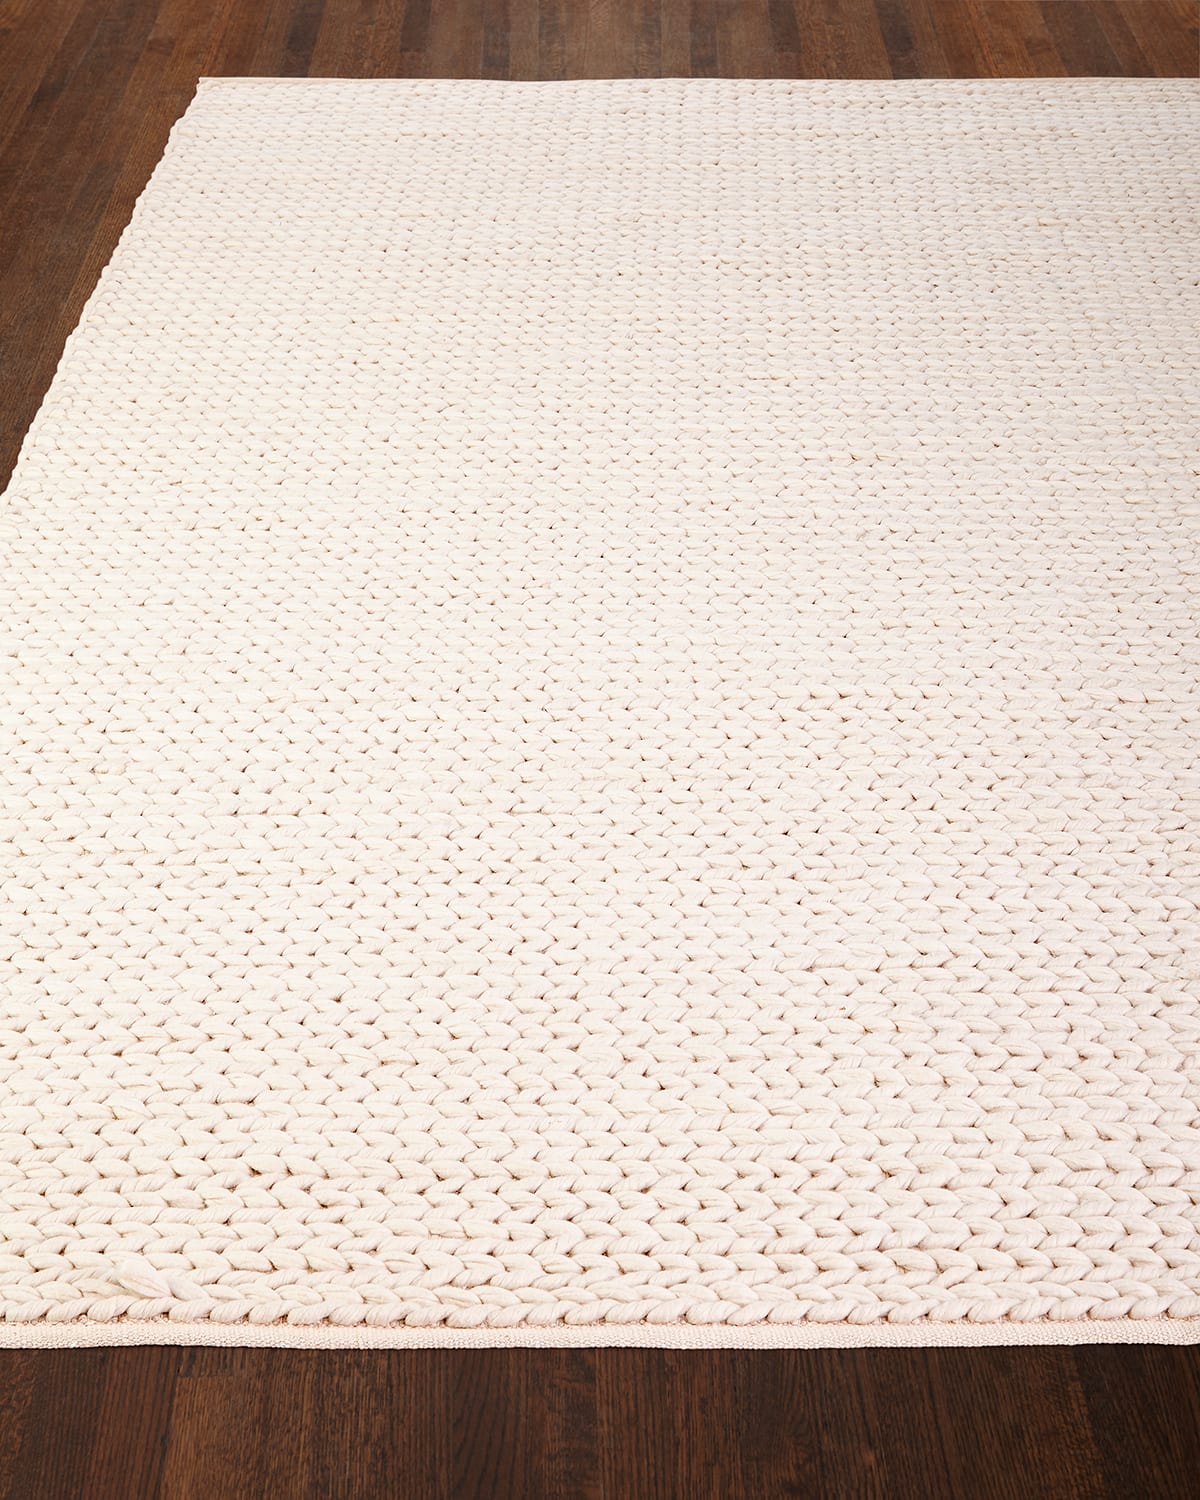 Exquisite Rugs Leonore Hand-loomed Rug, 8' X 10' In Ivory